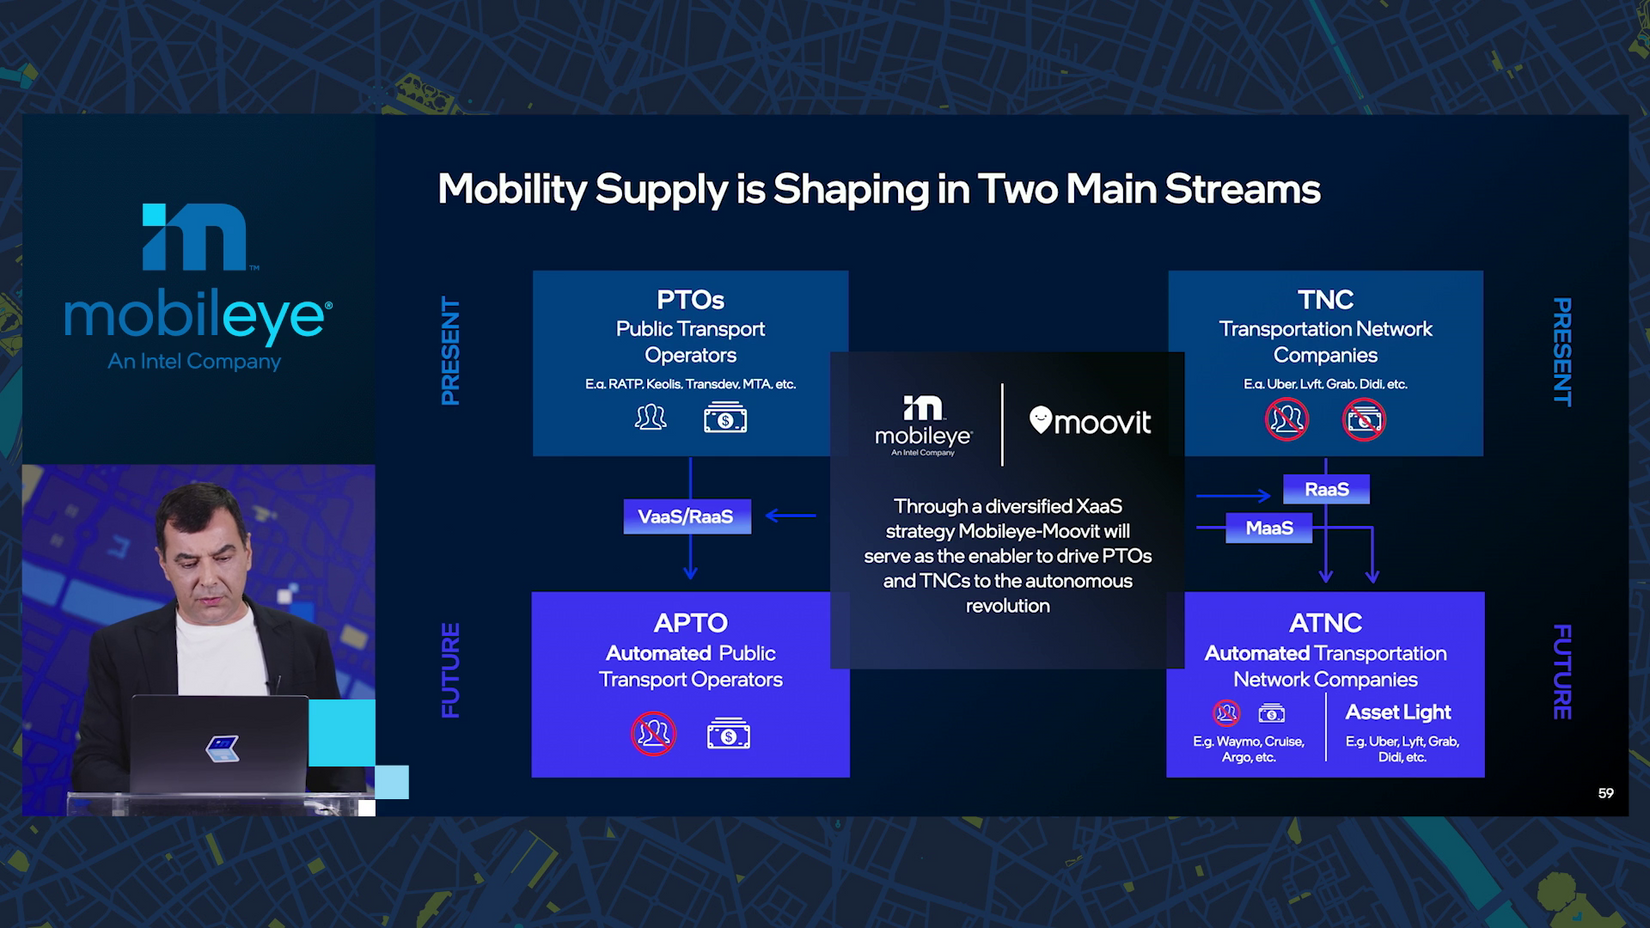 Mobility supply is shaping in two main streams